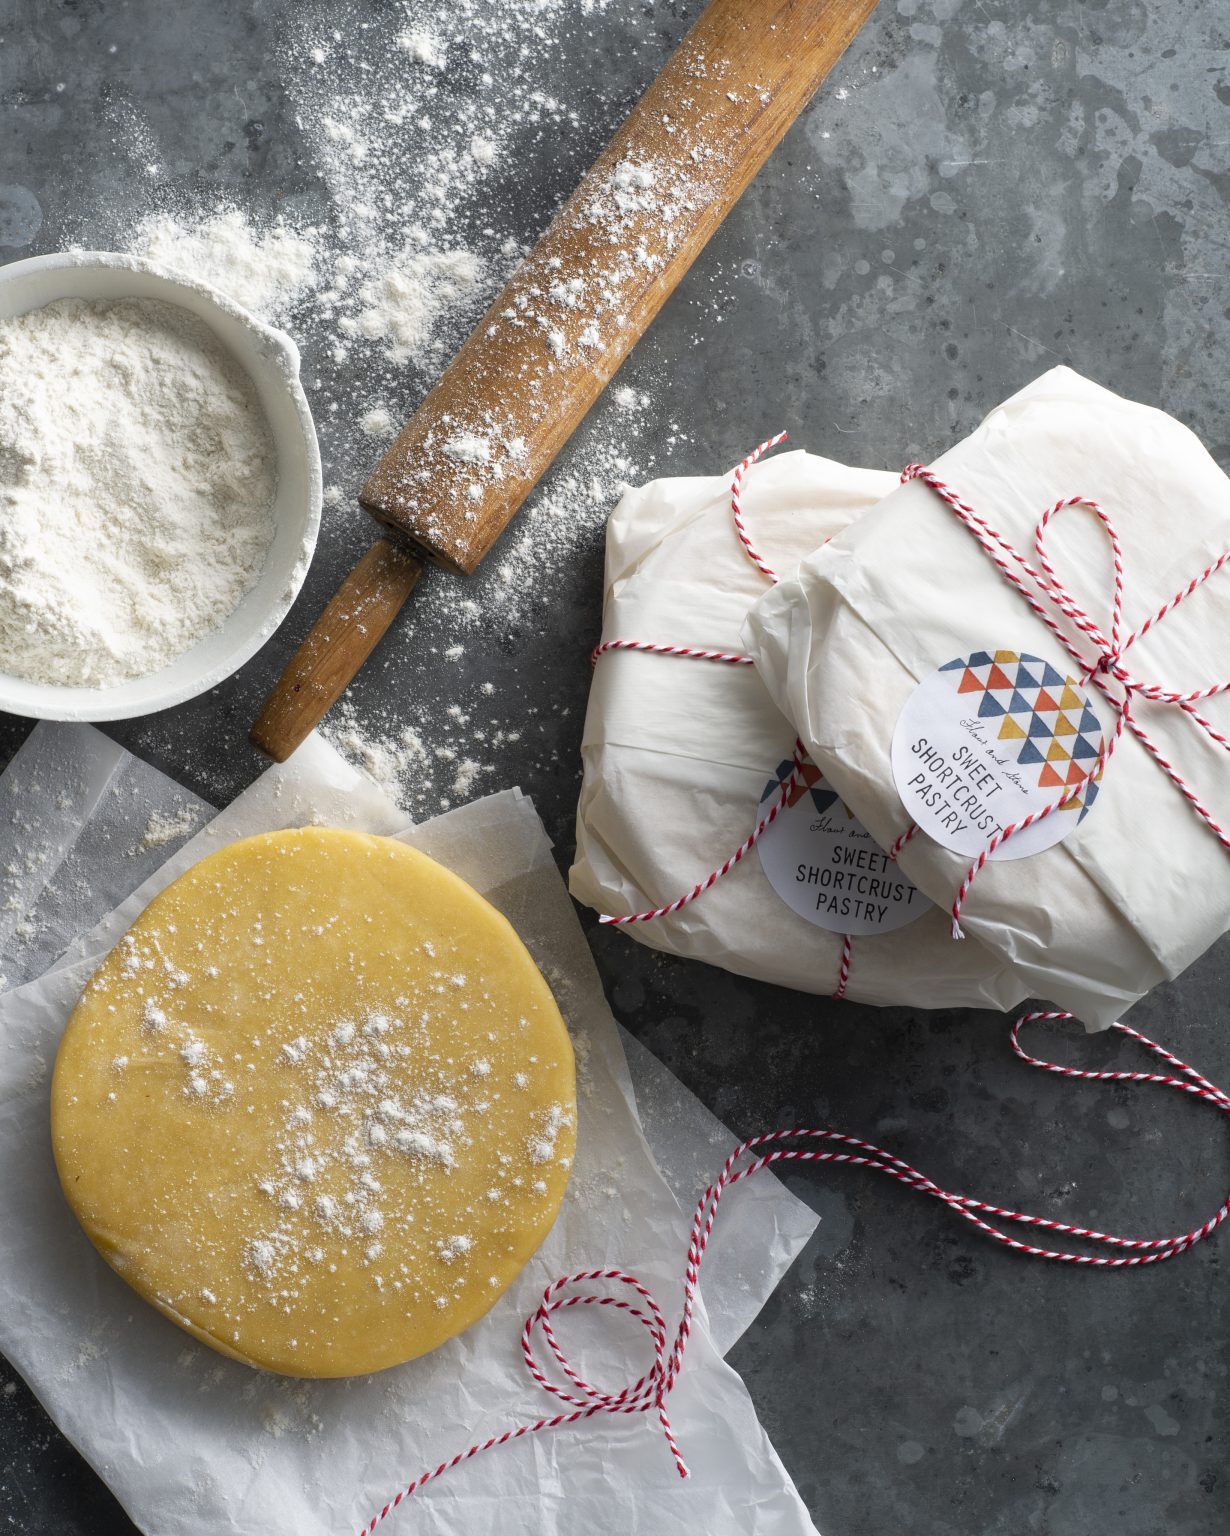 Sweet shortcrust pastry: Flaky, buttery, perfect for desserts